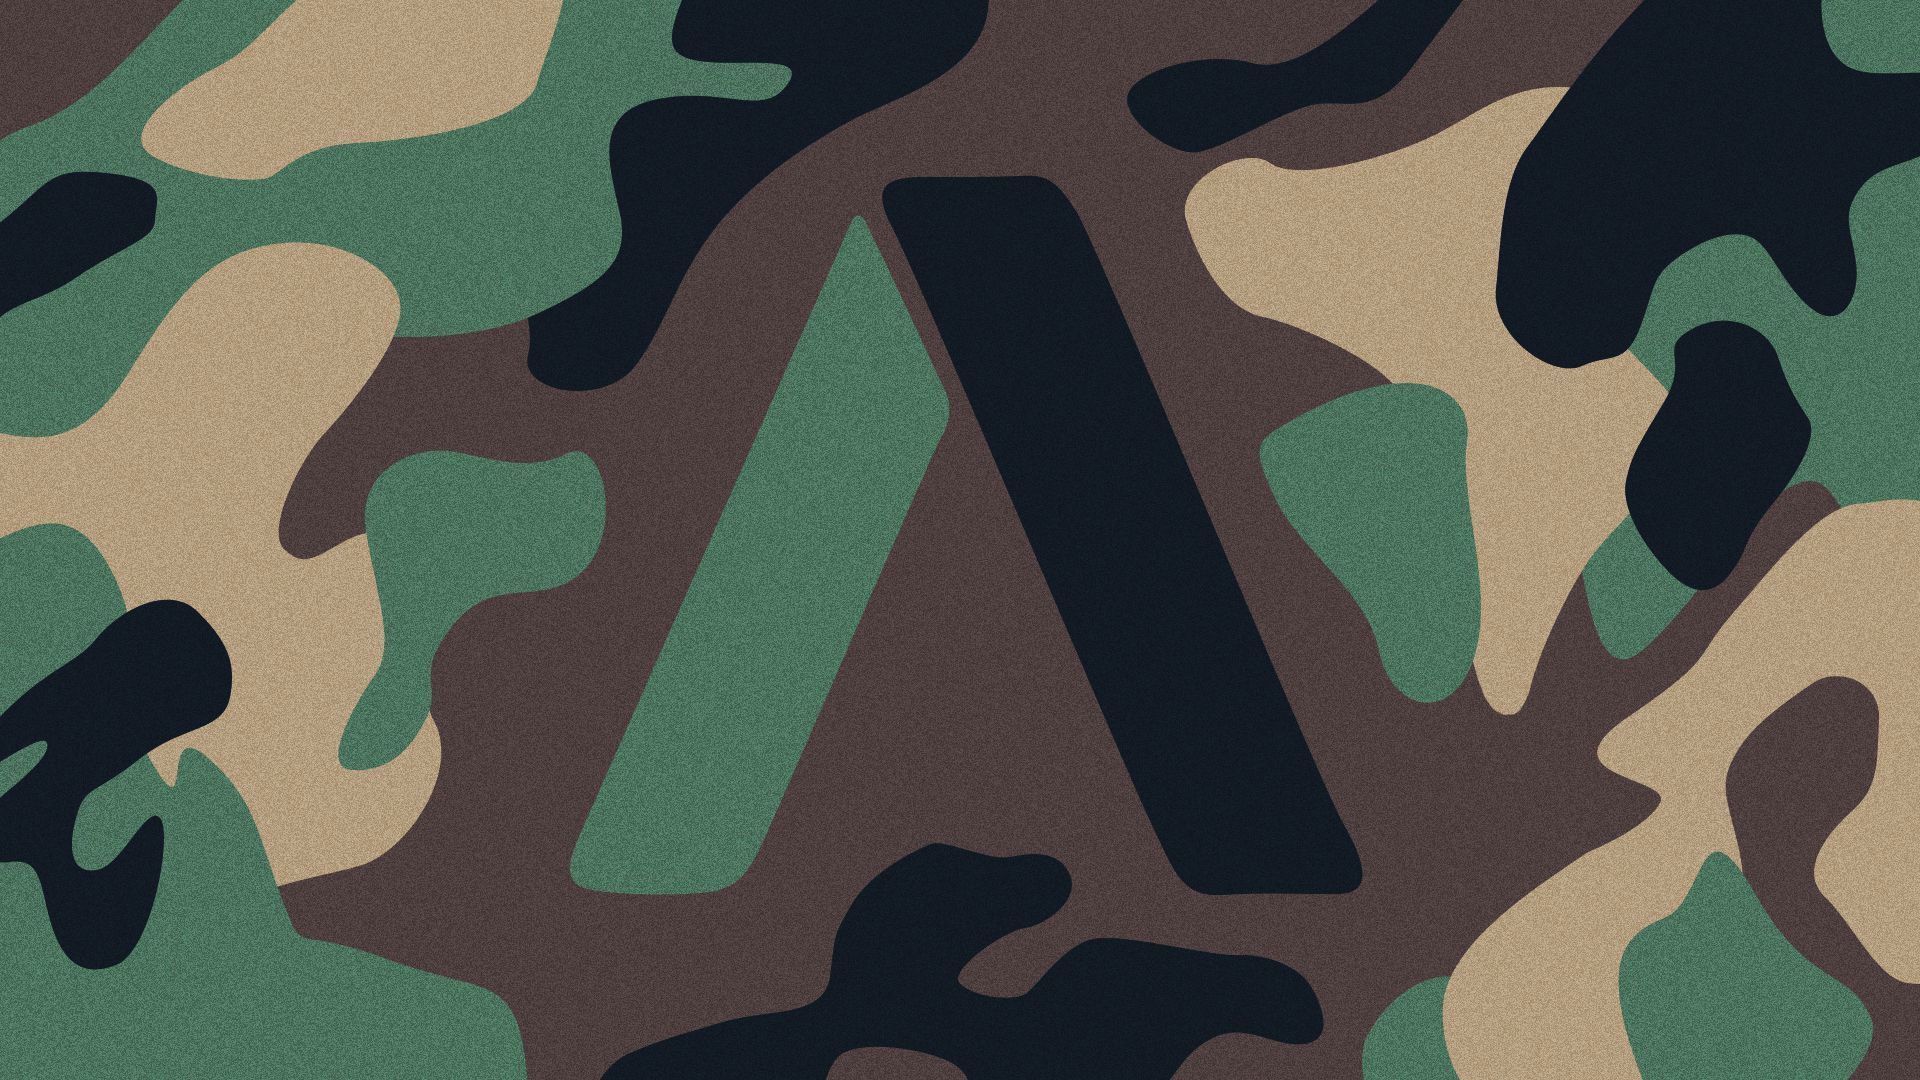 Illustration of the Axios logo on a camouflage background. 